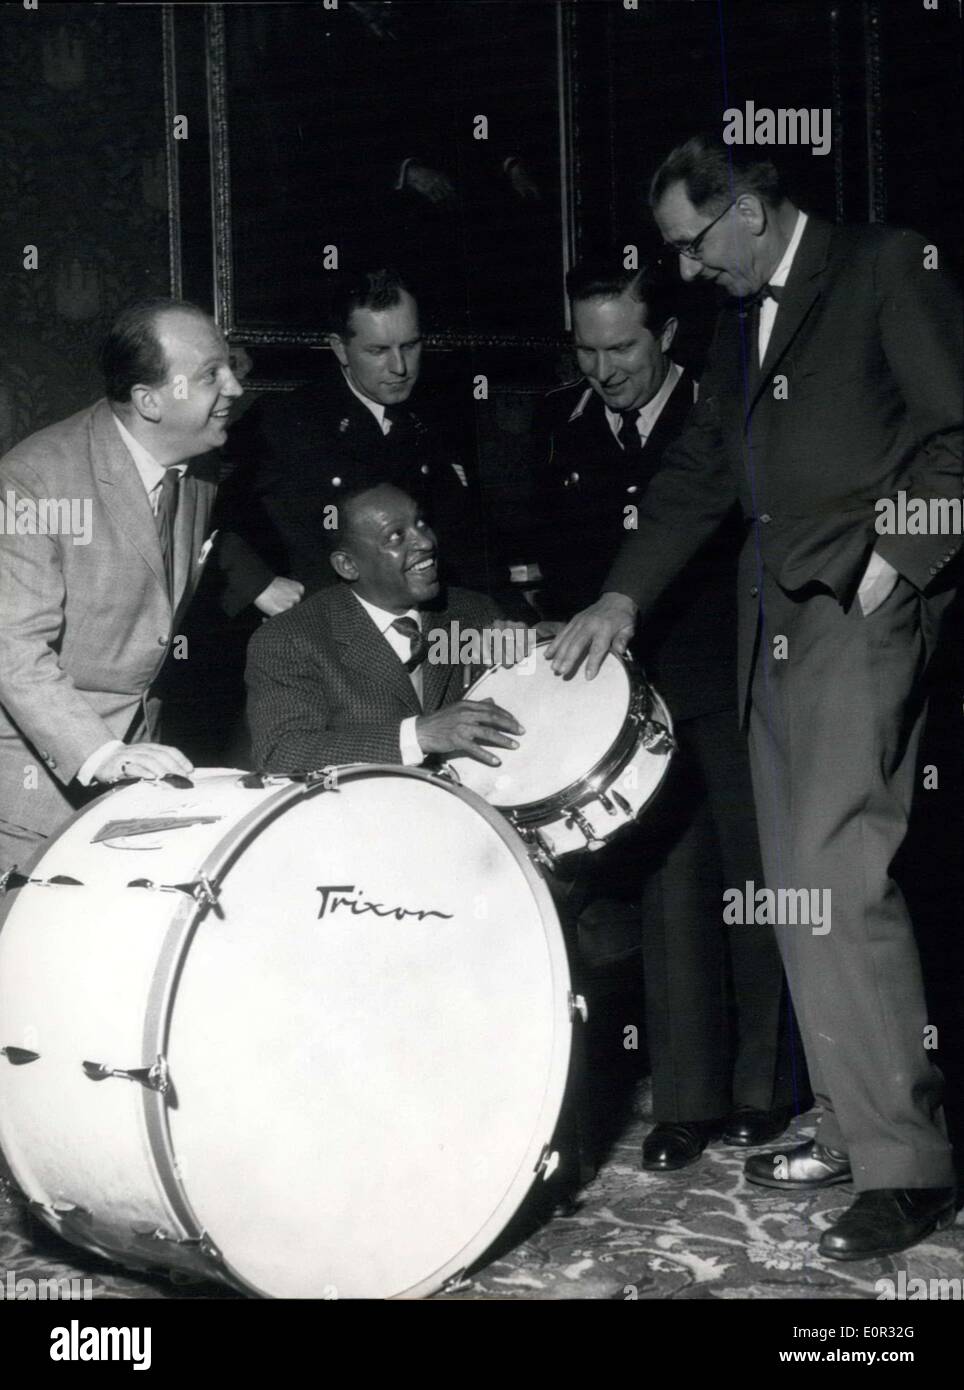 Dec. 30, 1957 - Kettledrum and drum for the police band The famous jazz musician Lionel Hampton was giving a kettledrum and a drum for present to the police ban of Hamburg at the town hall of Hamburg. Momentarily Lionel starts for a world trip, which began in Germany. Our Picture shows: Mr. Weimer from the firm Trixon, the policeman from the percussion instrument Winkler, Lionel Hampton, sitting, the leader of the police band Grenz, and police senator Dr. Kruger (all to be seen from left to right side) Stock Photo